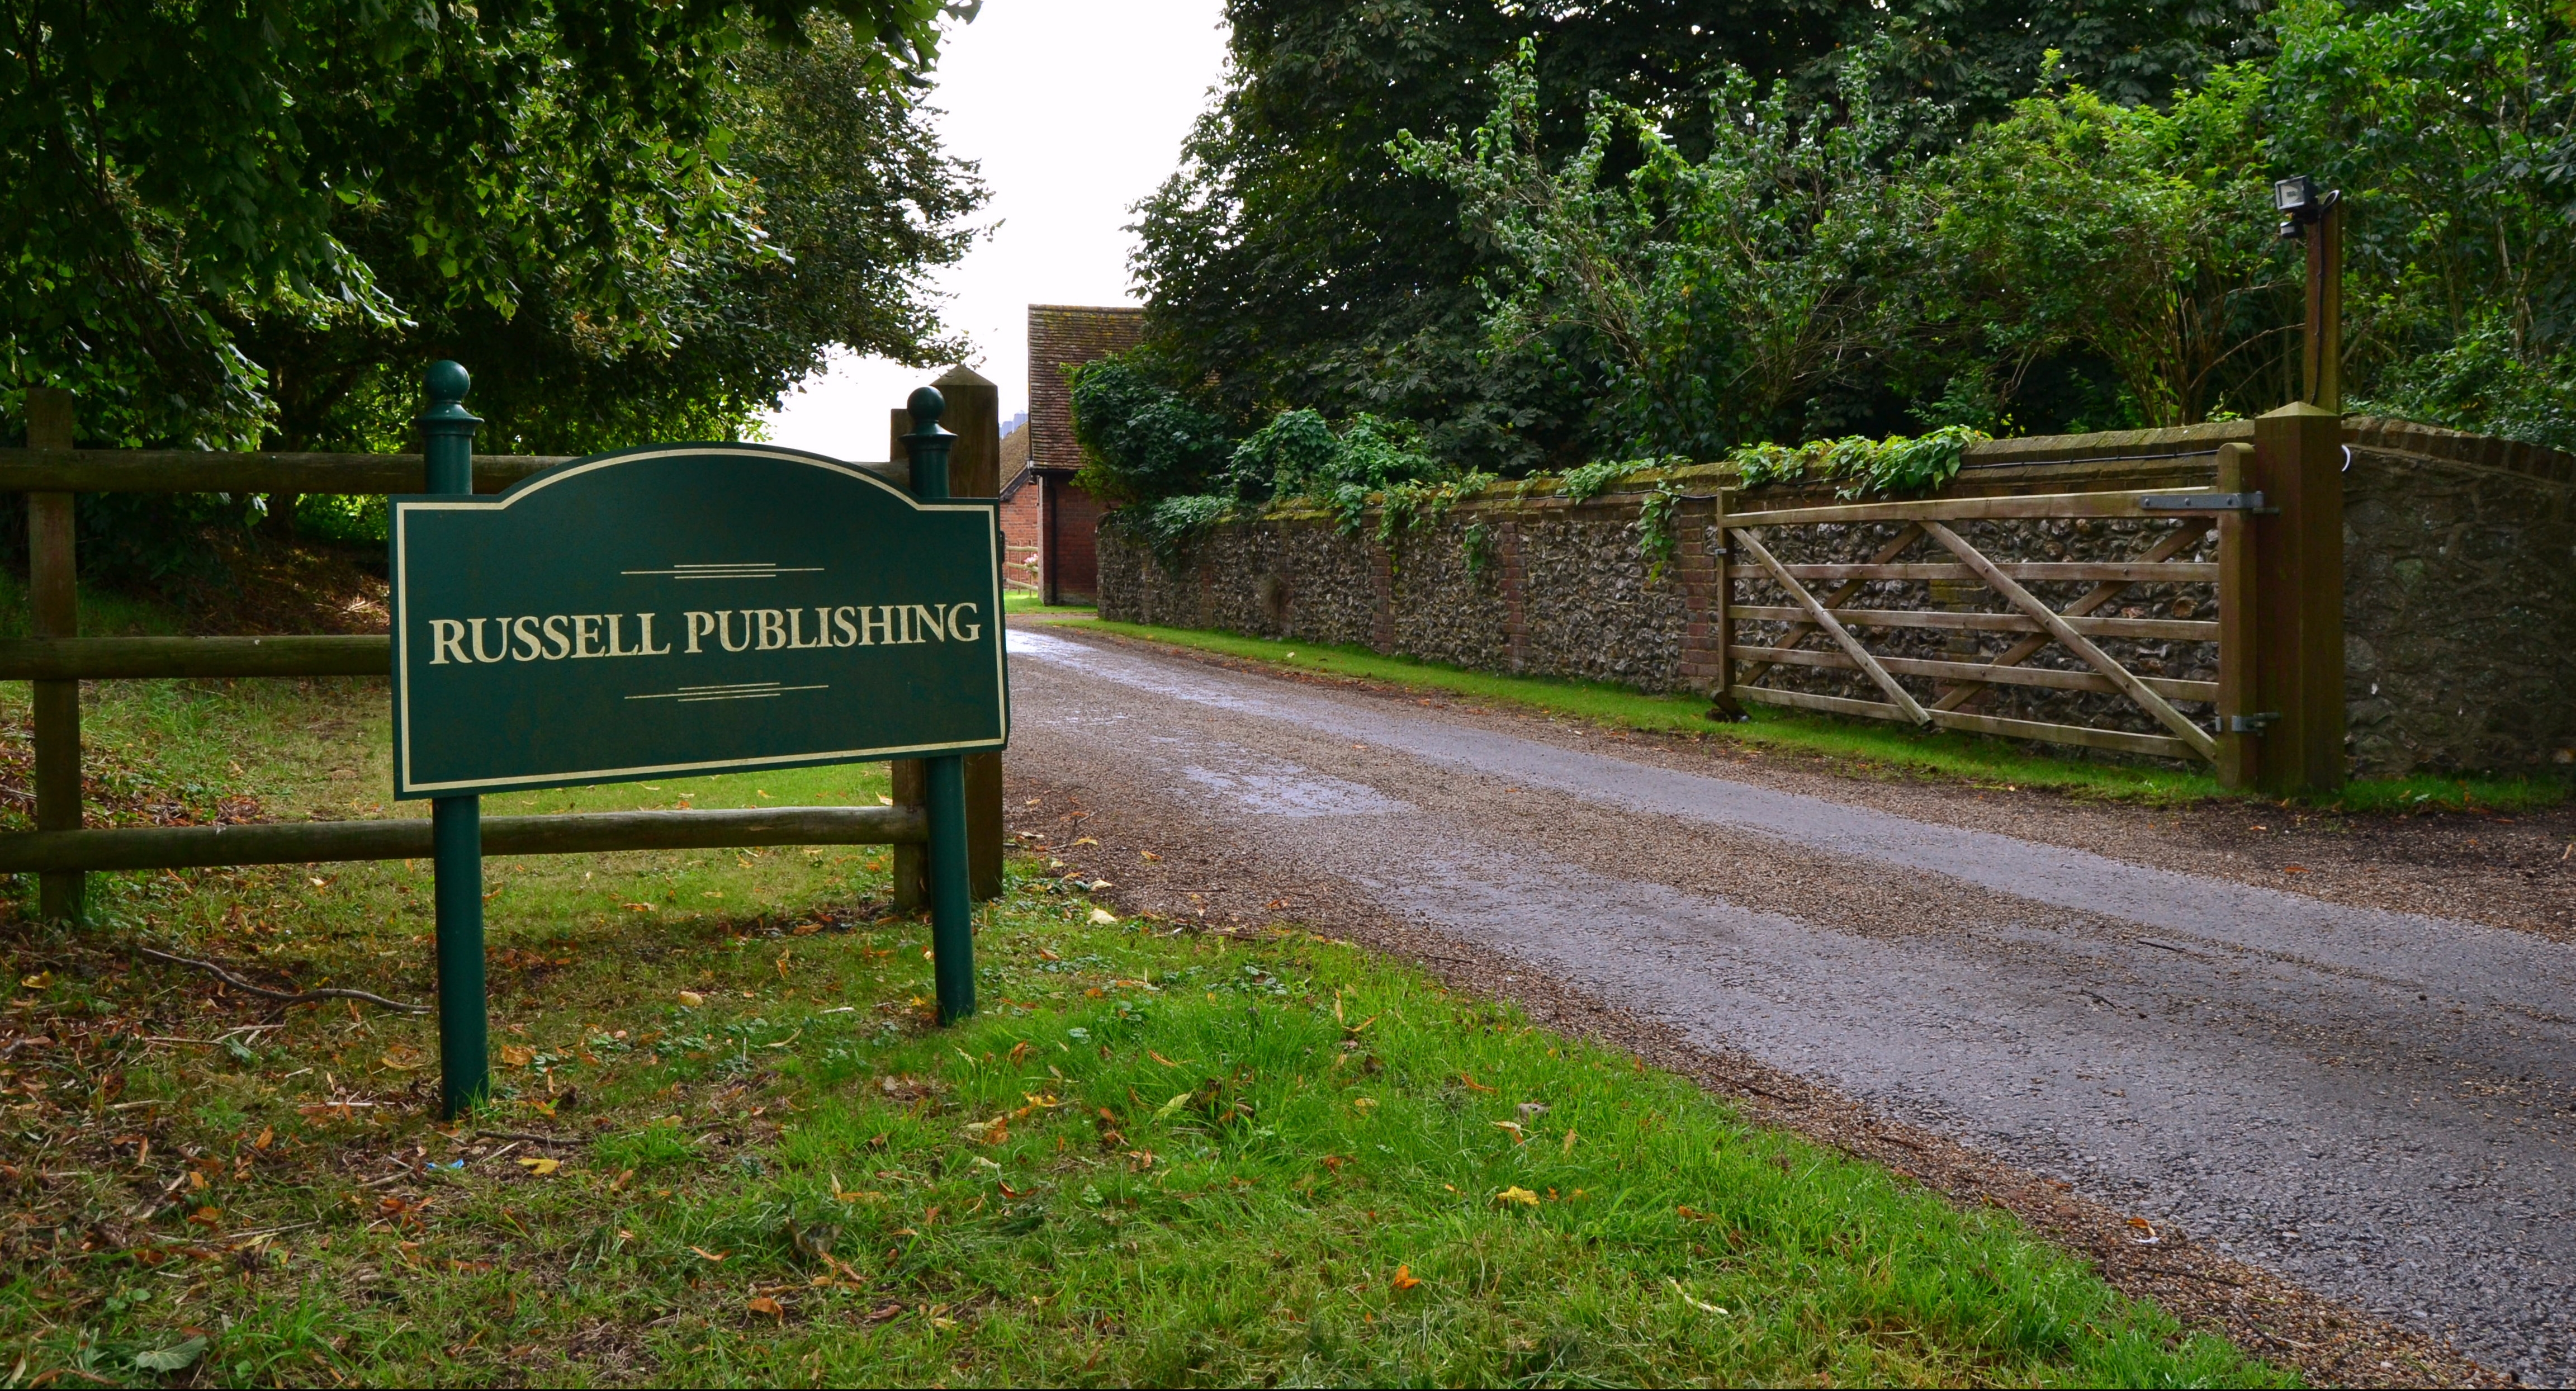 Welcome to Russell Publishing's offices in Brasted, Kent